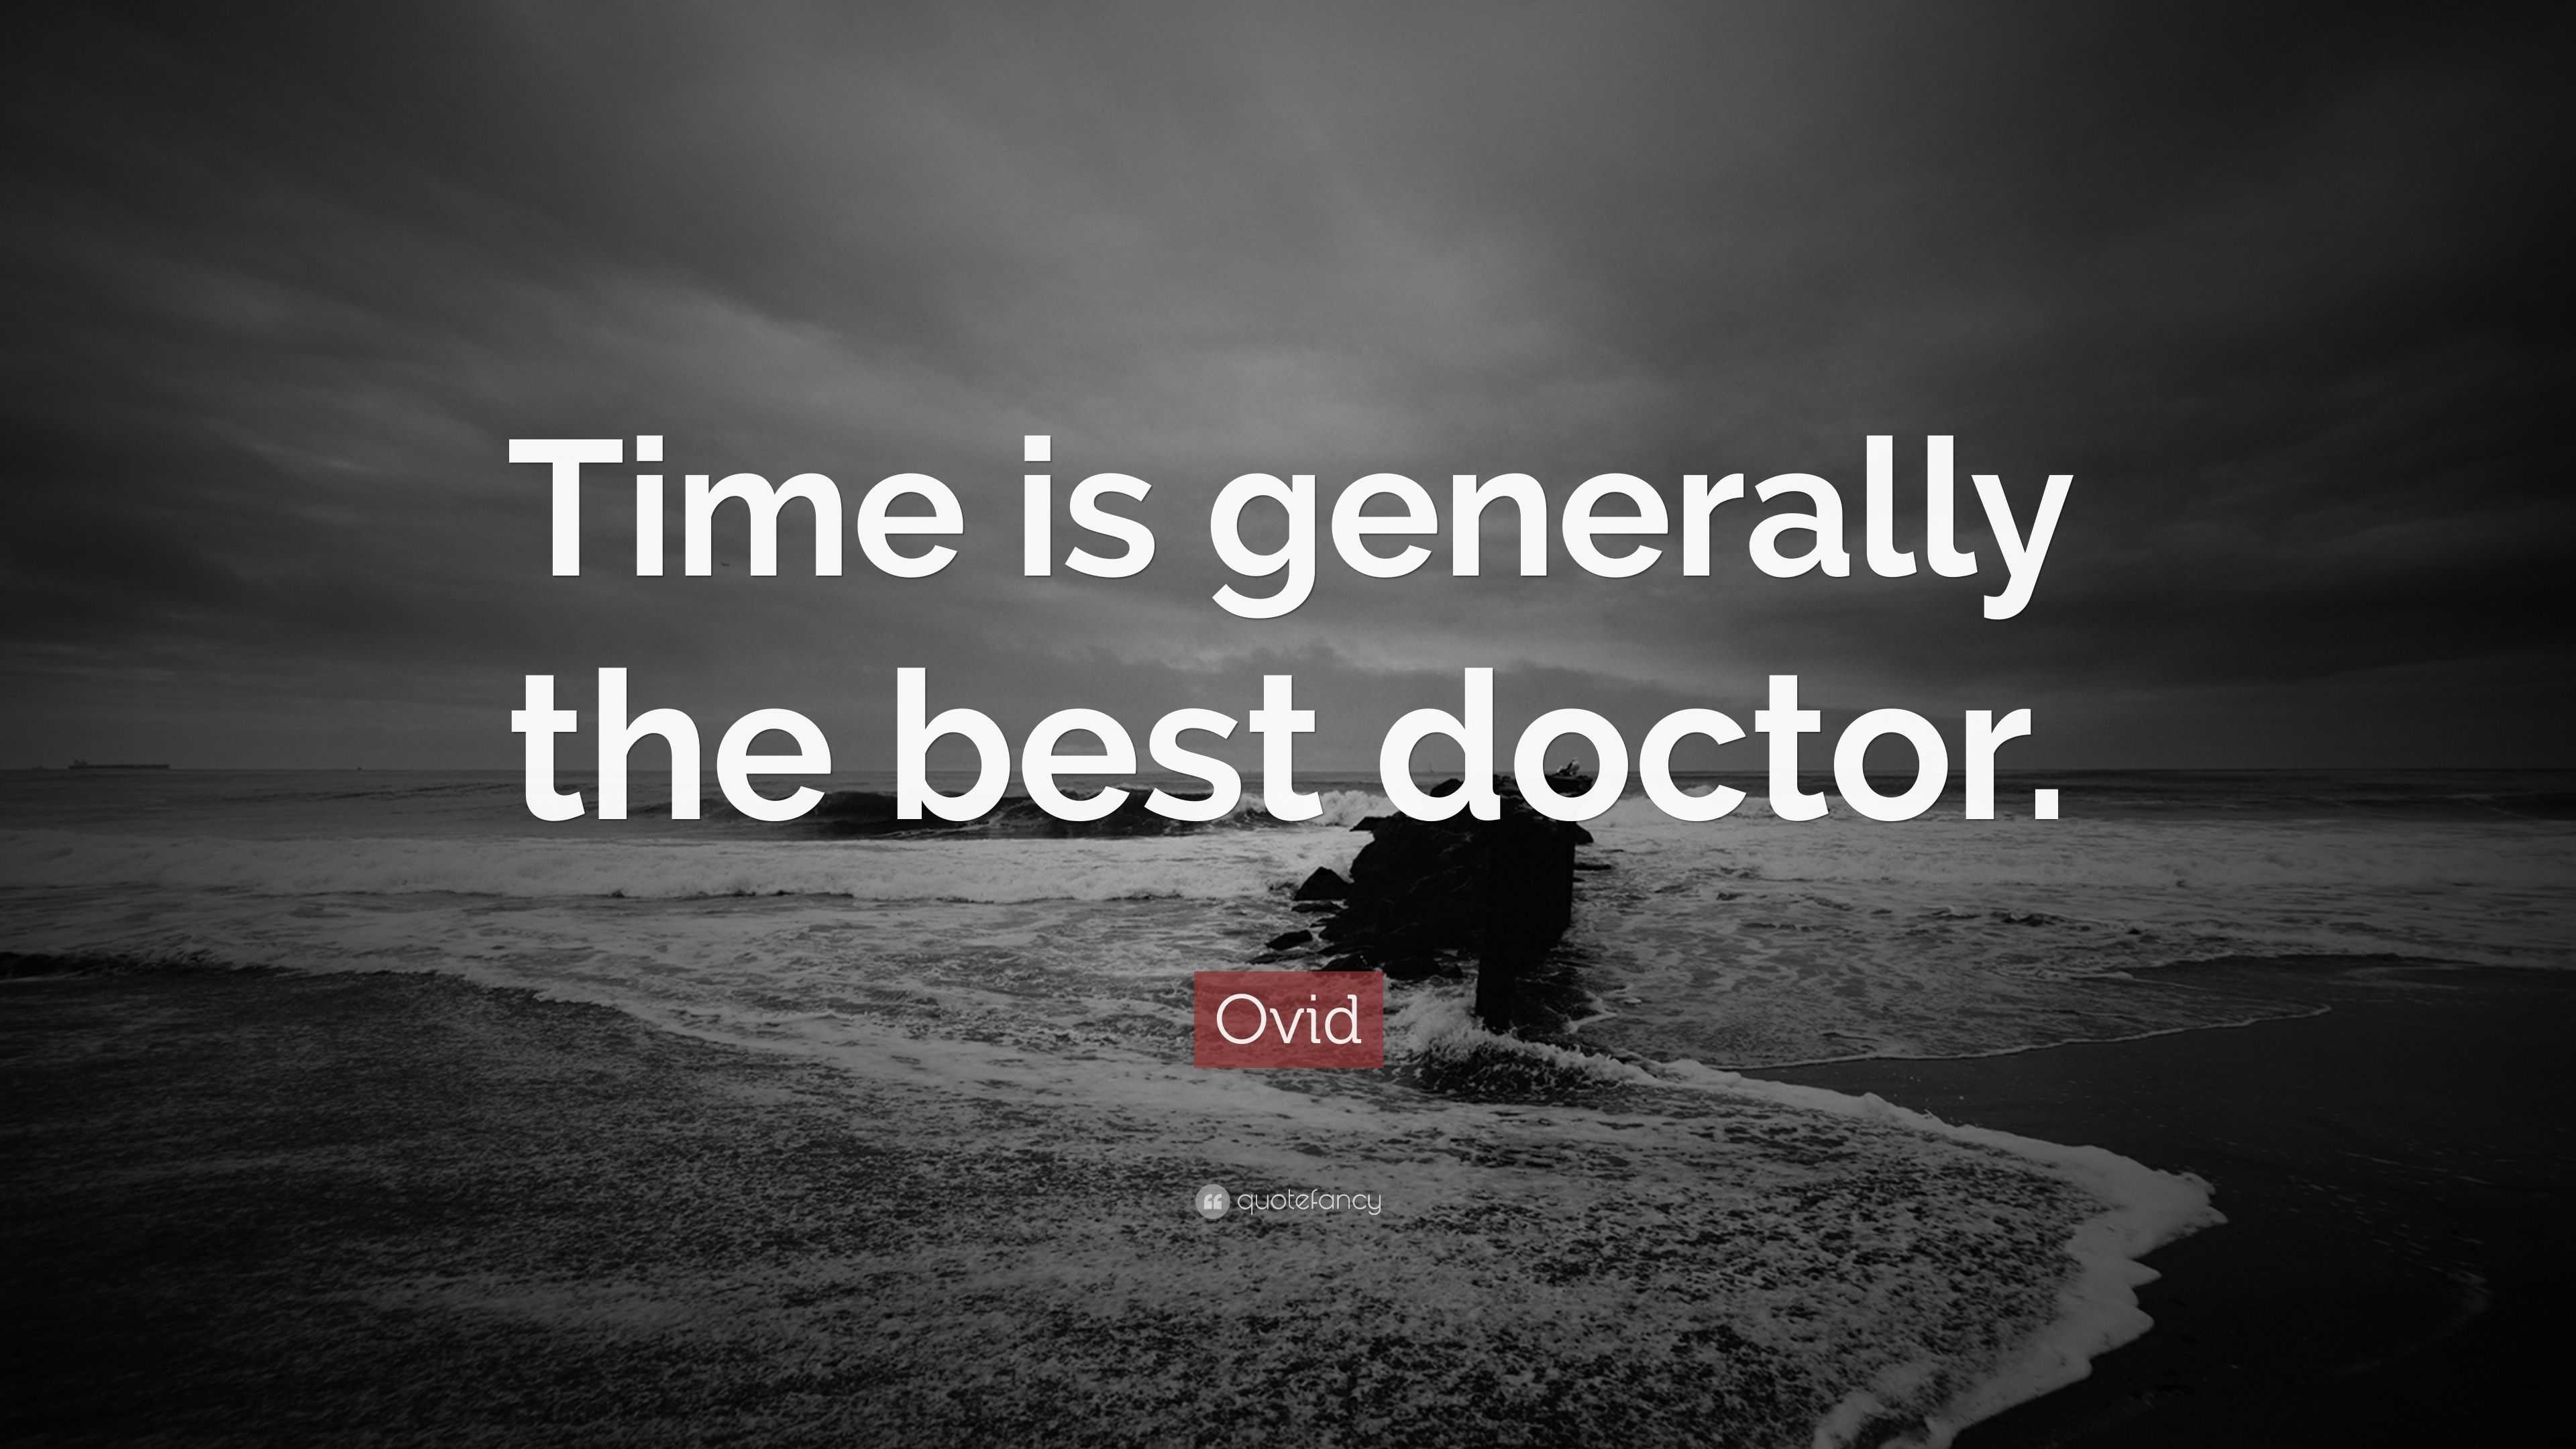 Ovid Quote “Time is generally the best doctor ”